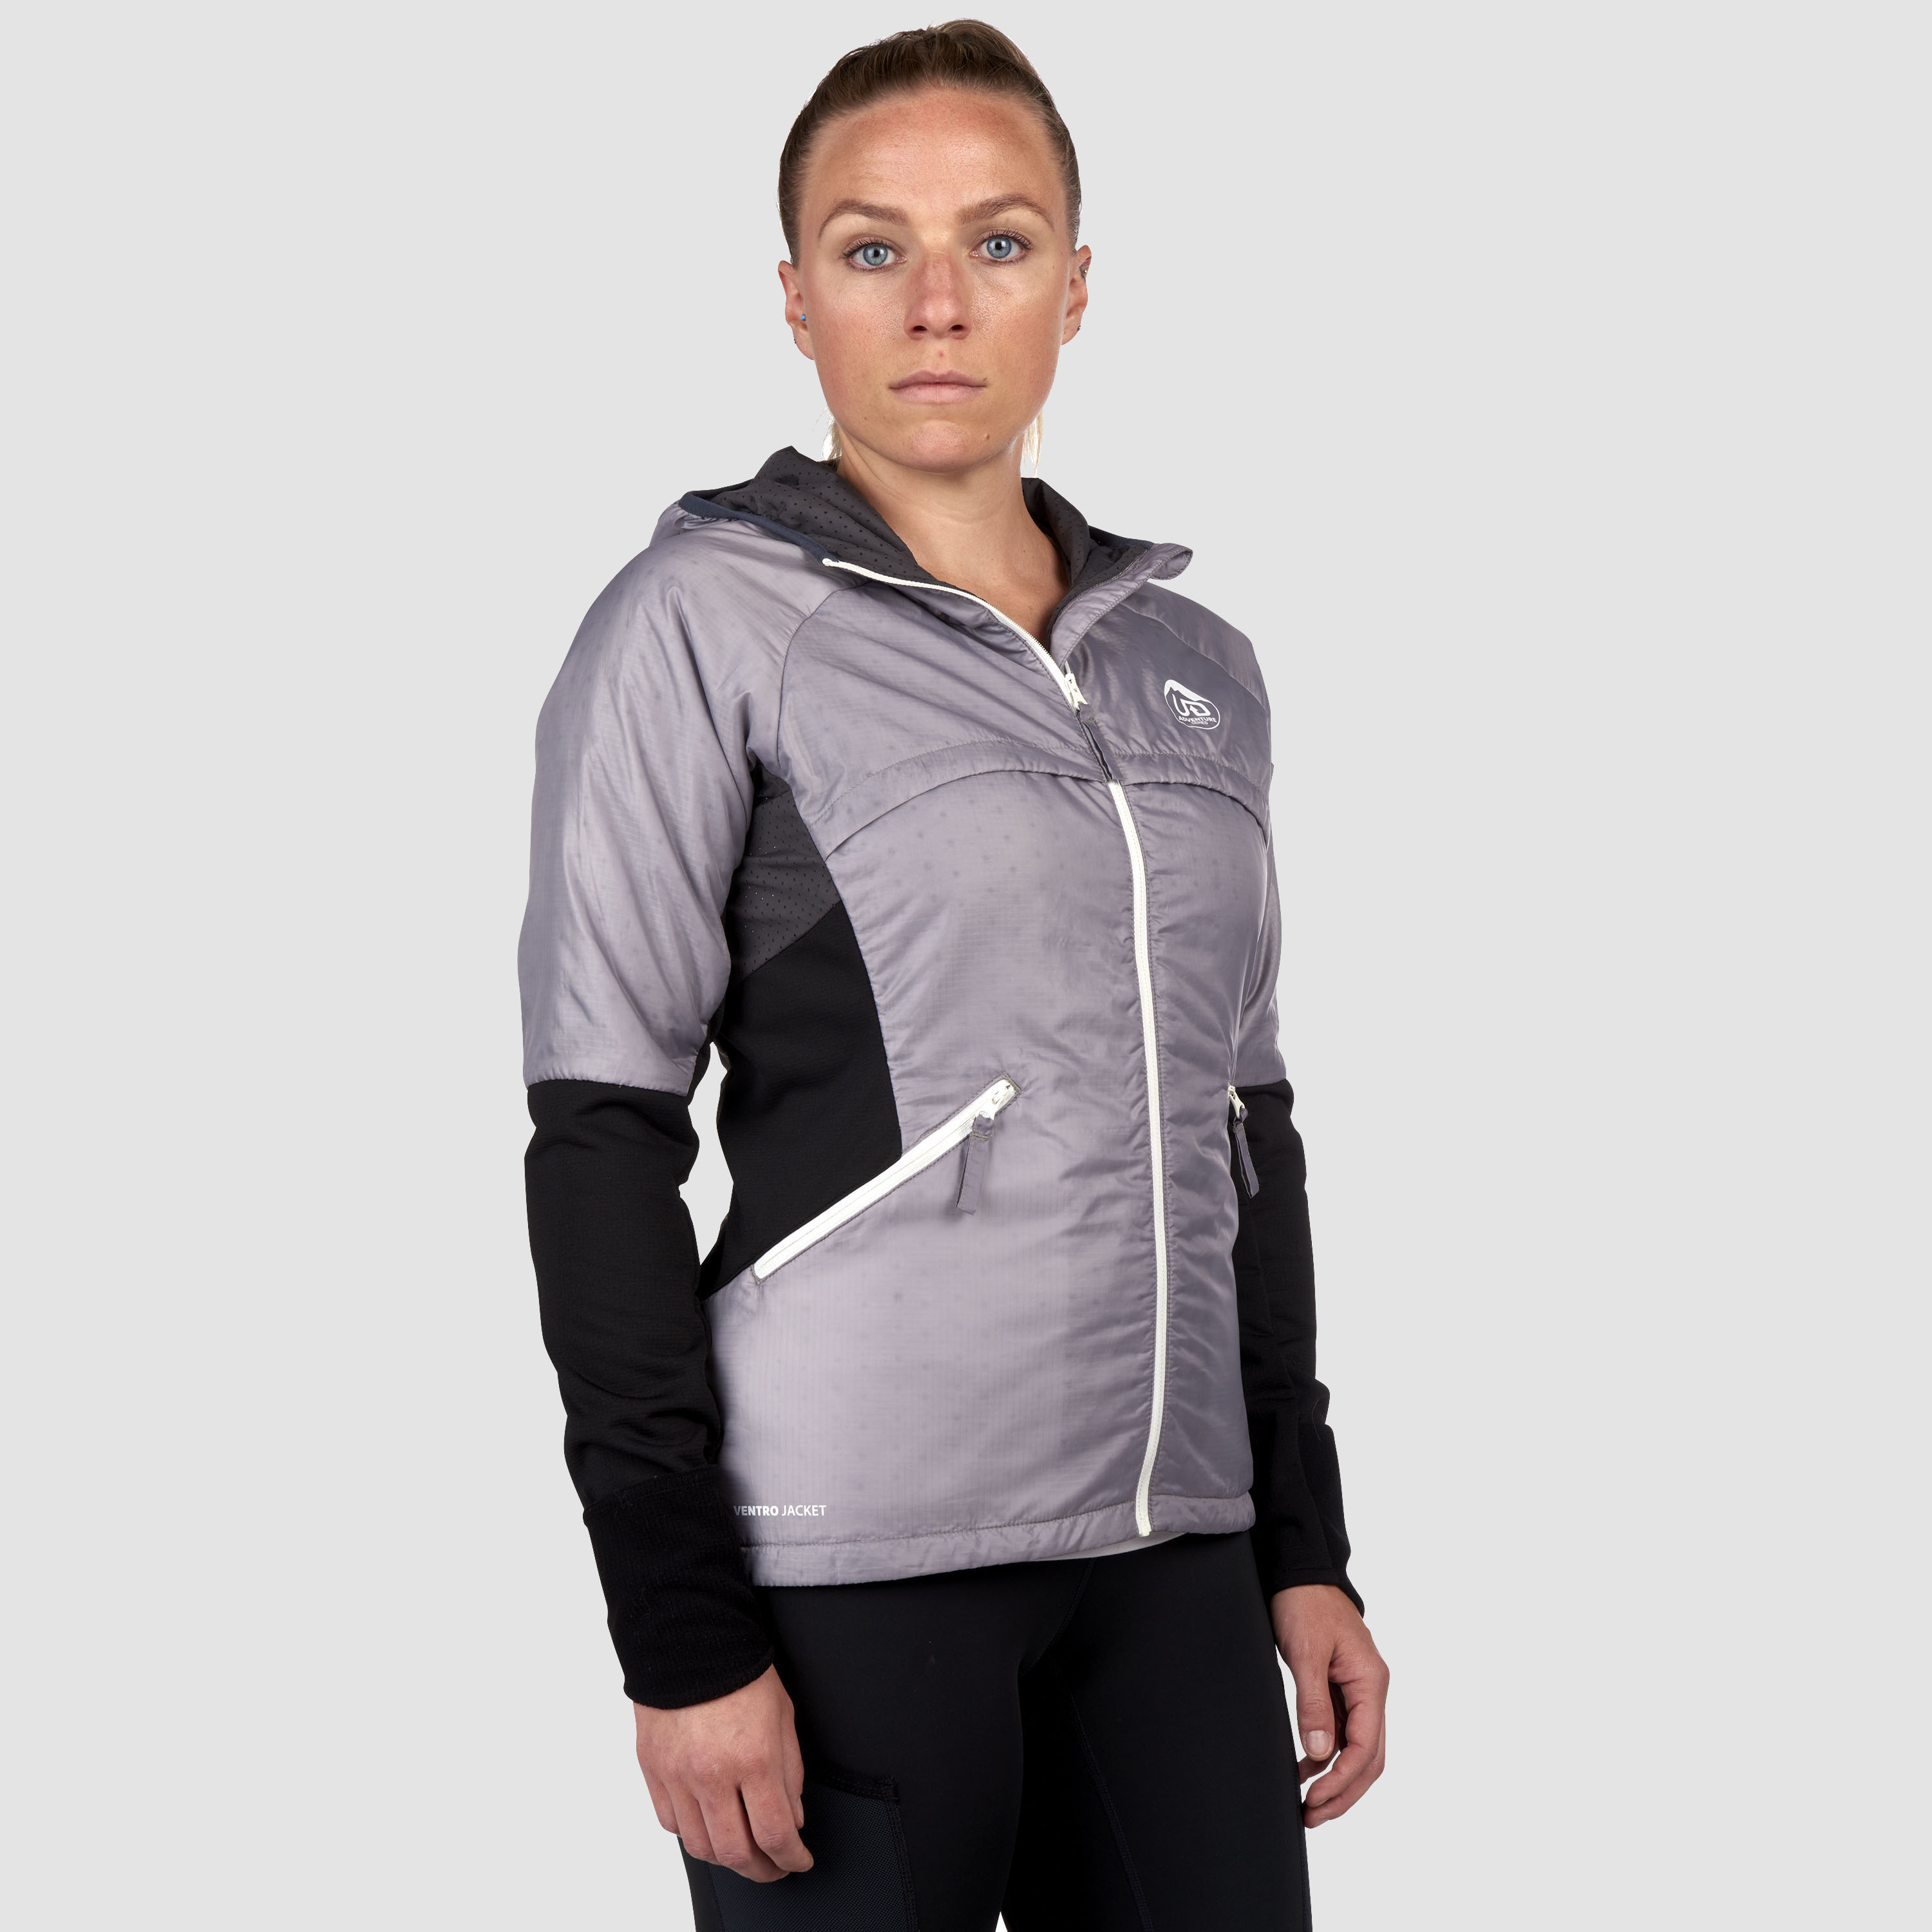 Ultimate Direction Women's Ventro Jacket Size XS